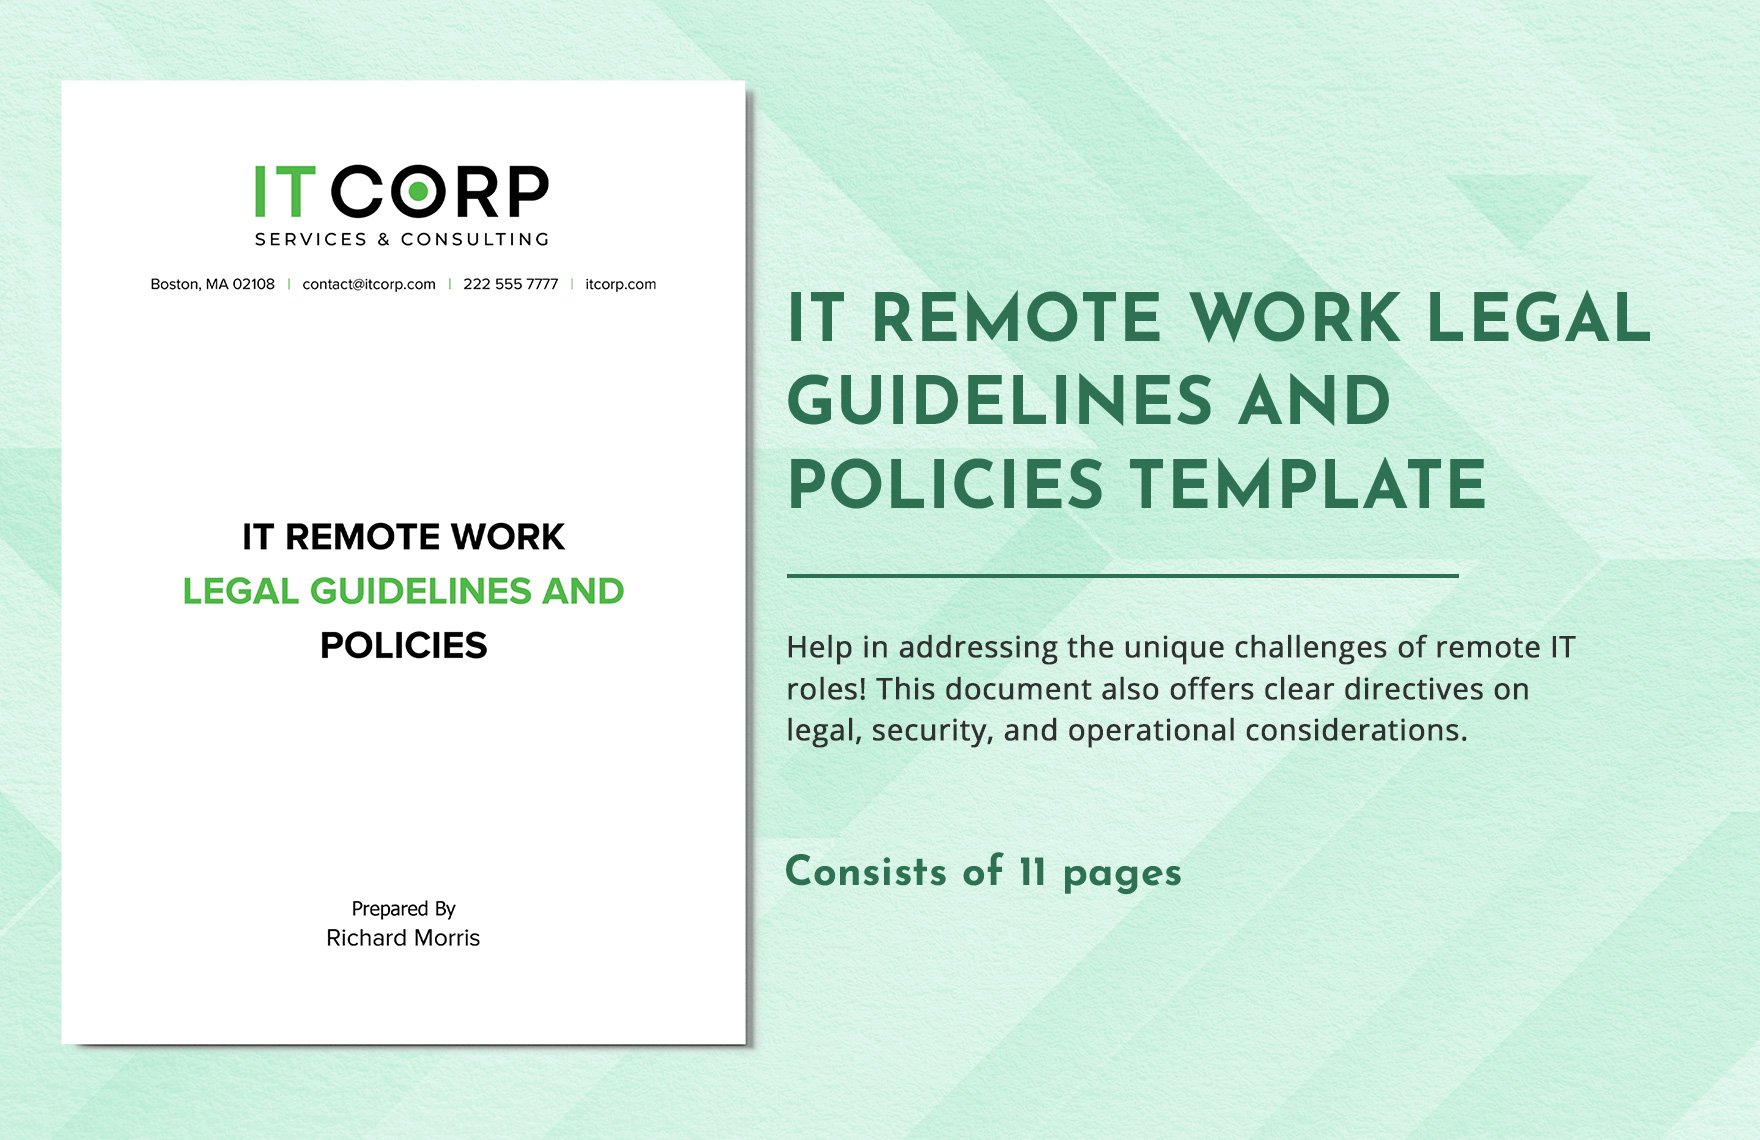 IT Remote Work Legal Guidelines and Policies Template in Word, Google Docs, PDF